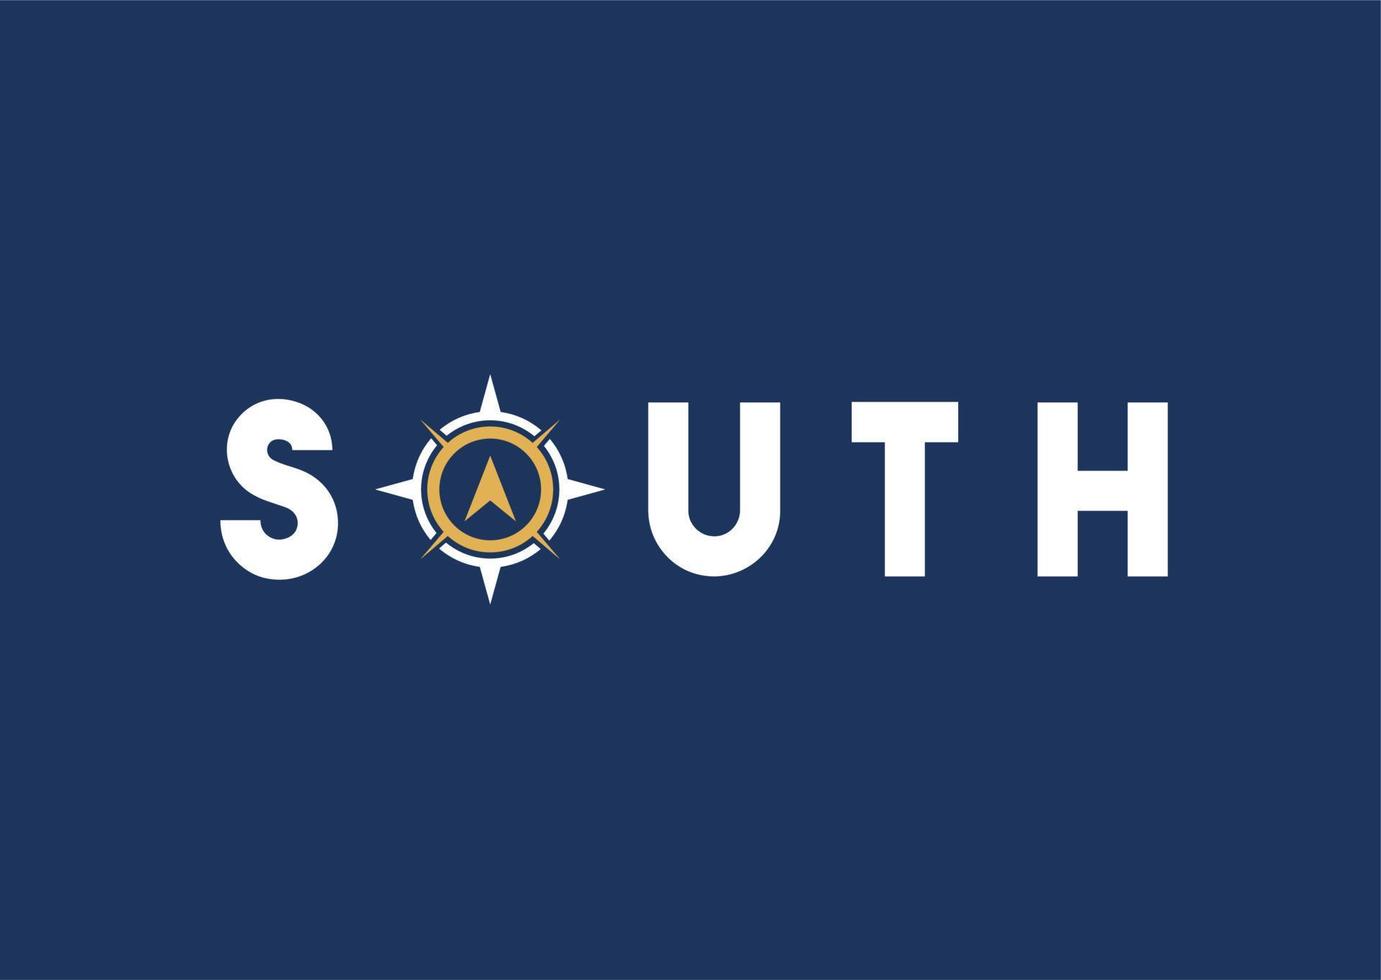 south Compass logo design template. Vector illustration in blue and yellow colors.